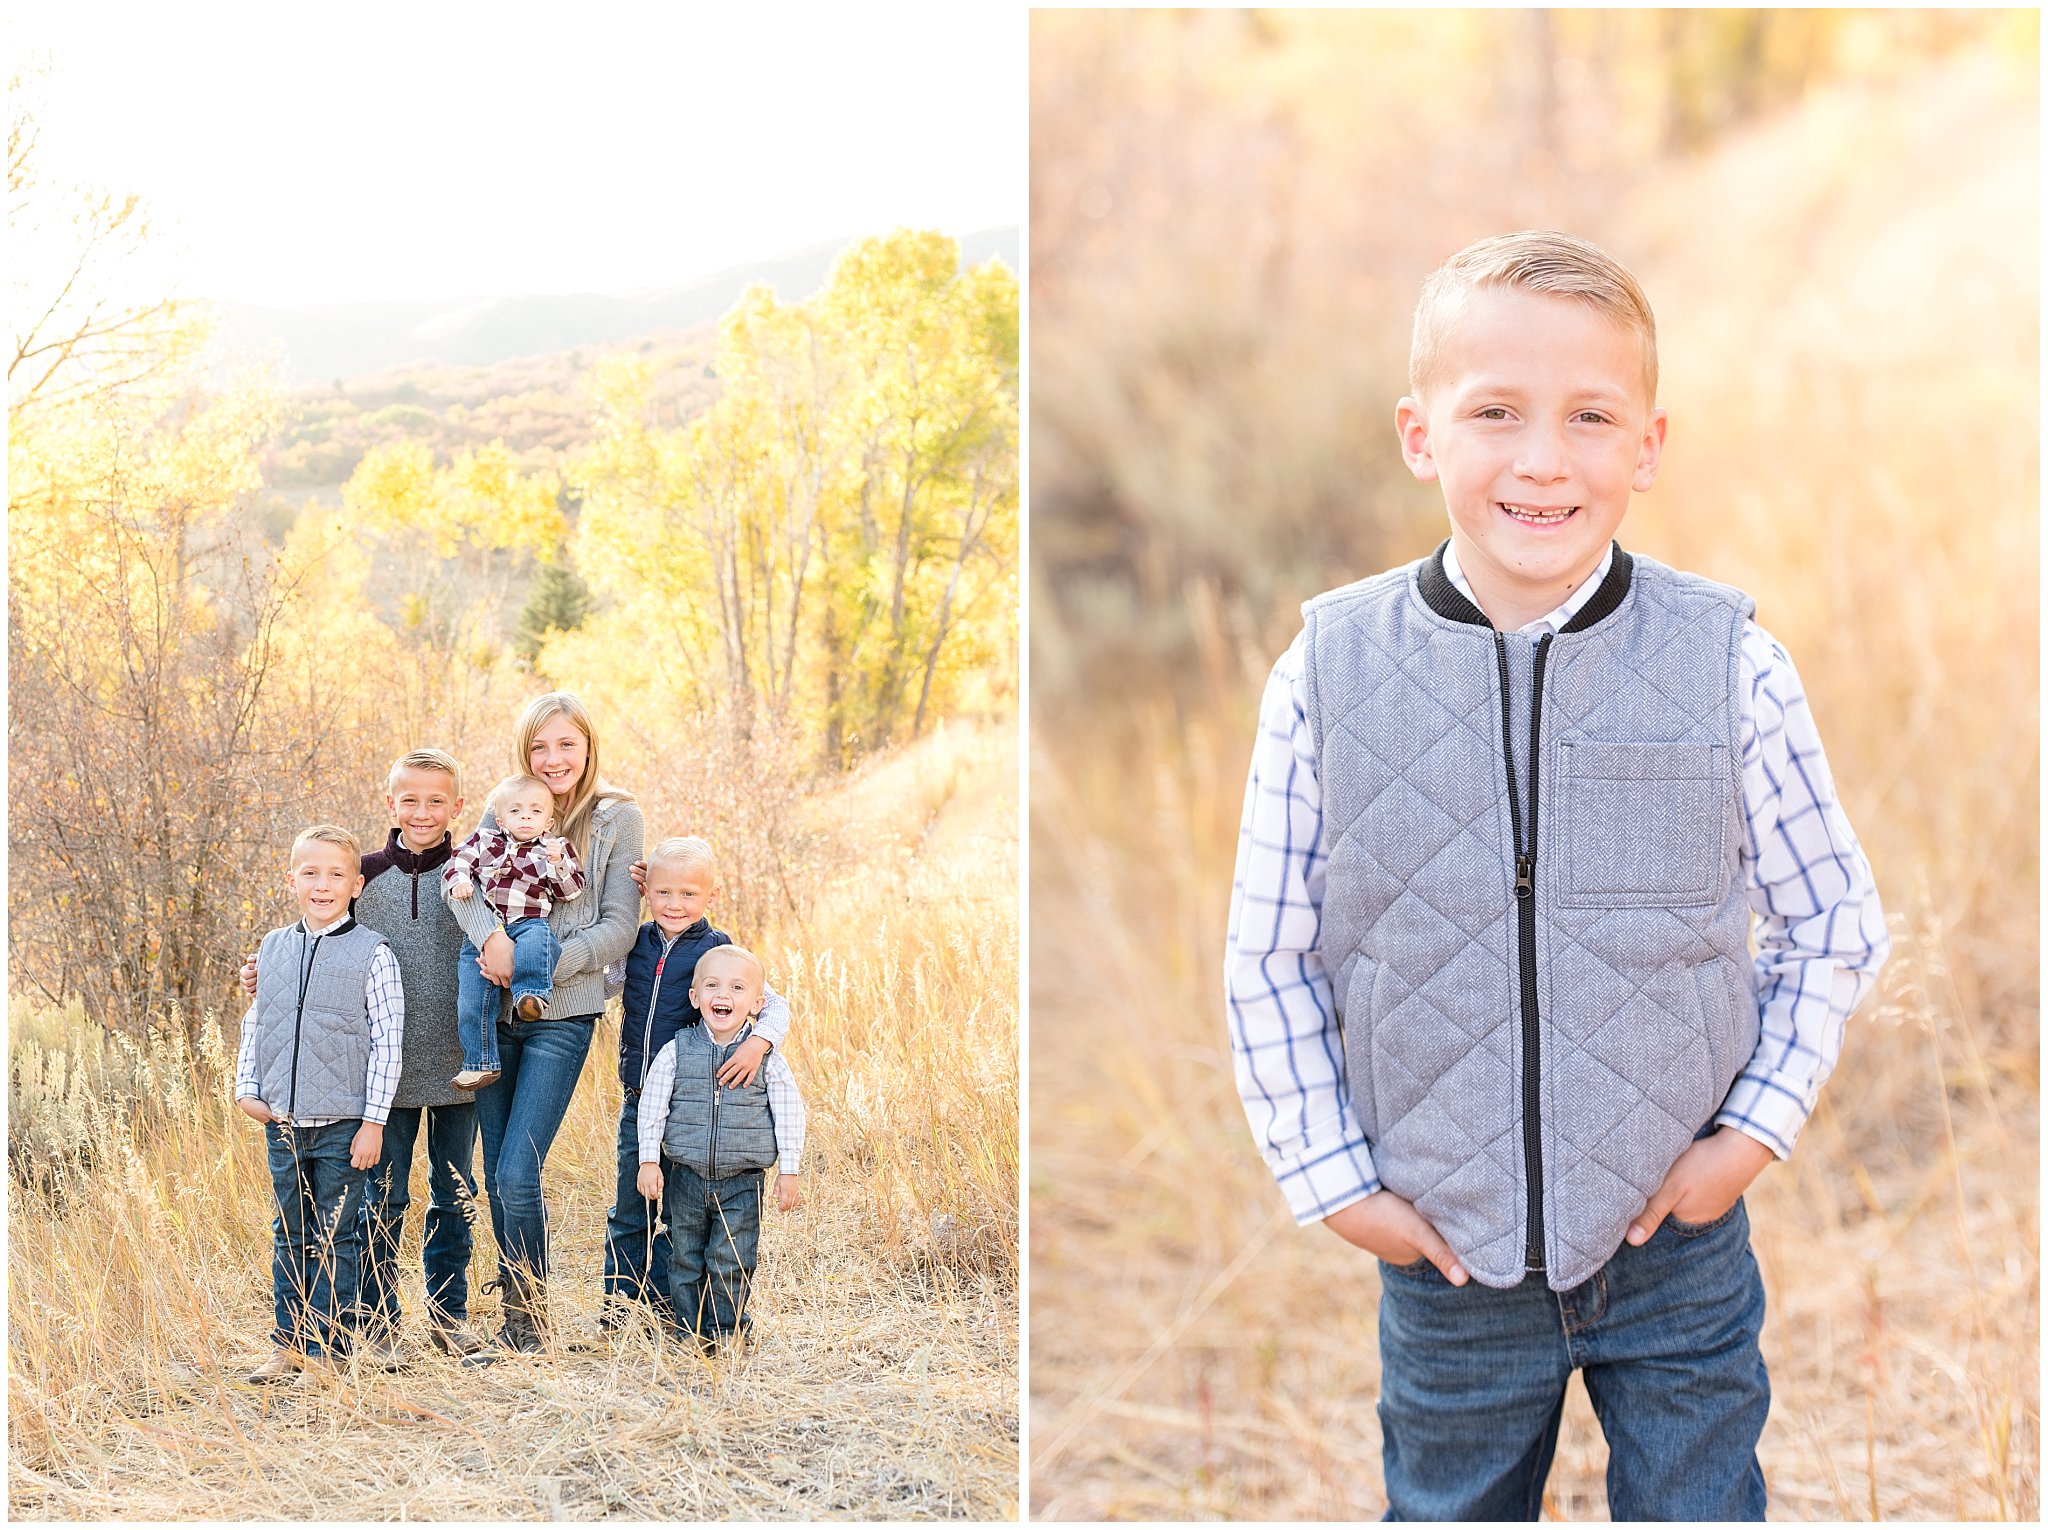 Picture of 6 siblings and young boy | Fall family photo session at Snowbasin | Snowbasin Resort | Jessie and Dallin Photography